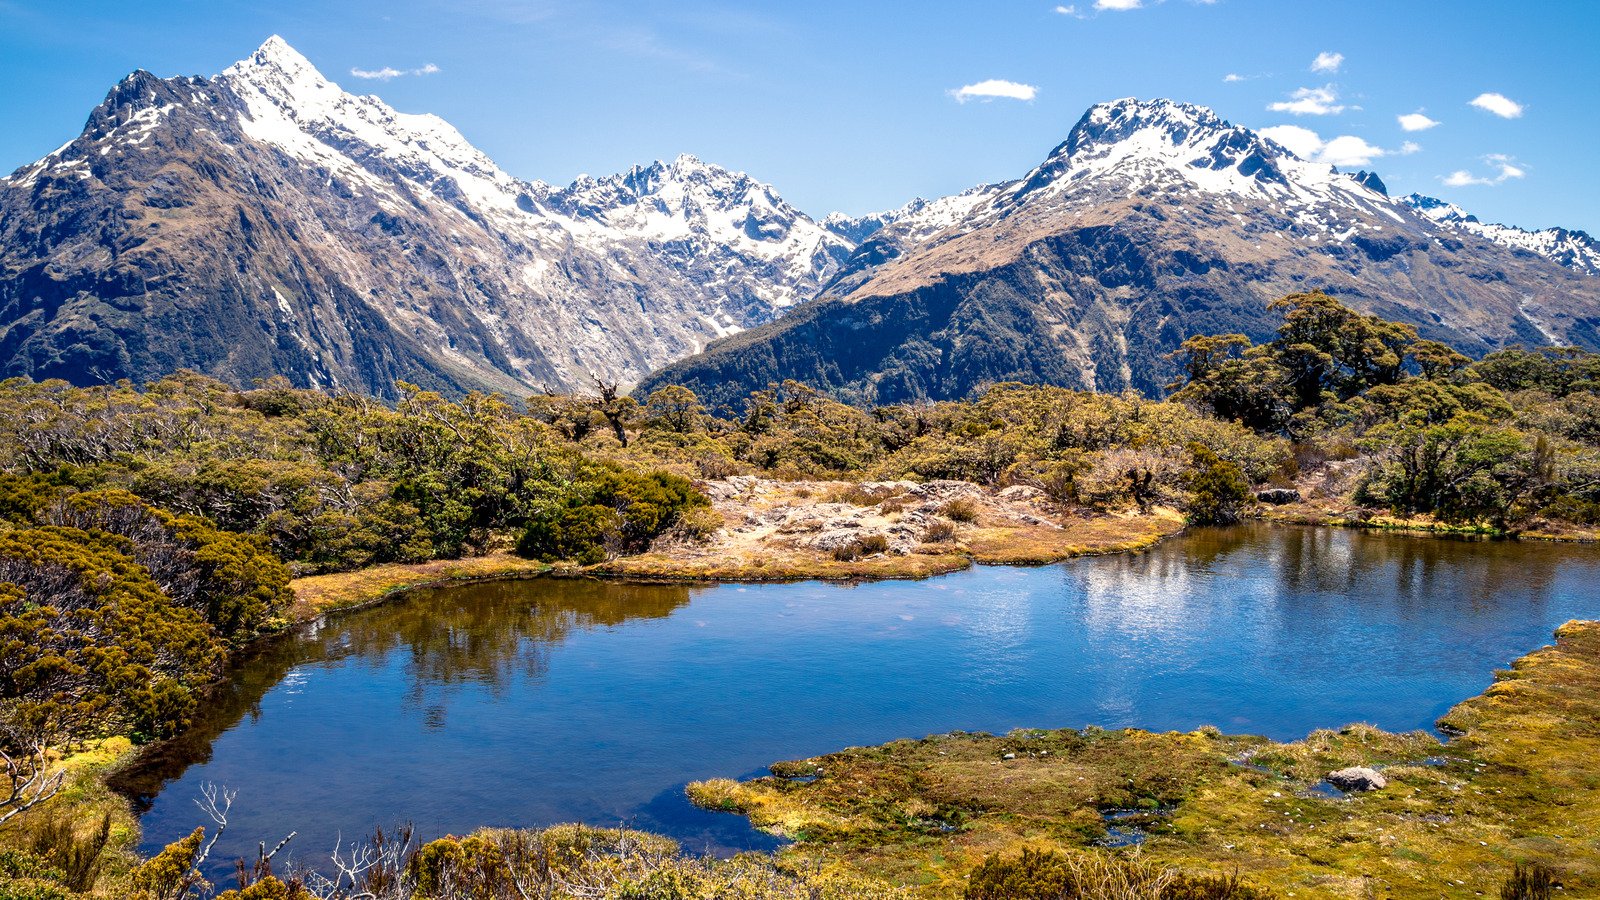 Discover Some Of The Best Of New Zealand's Landscapes On This Trail